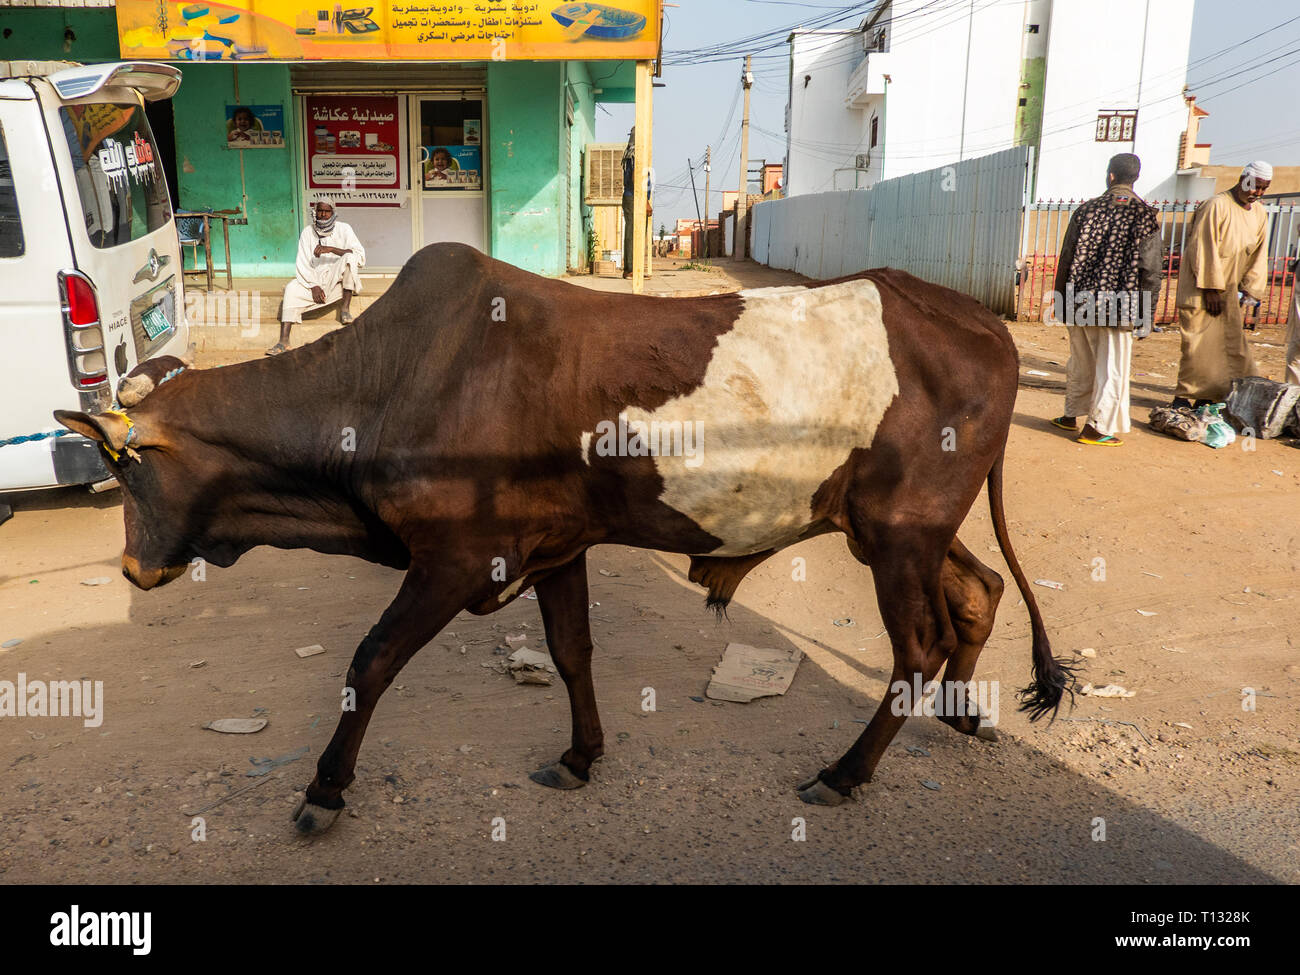 Nuri, Sudan, February 7., 2019: Ox with brown and white fur is pulled through the streets of the city in Sudan, on the way to the slaughterhouse. Stock Photo